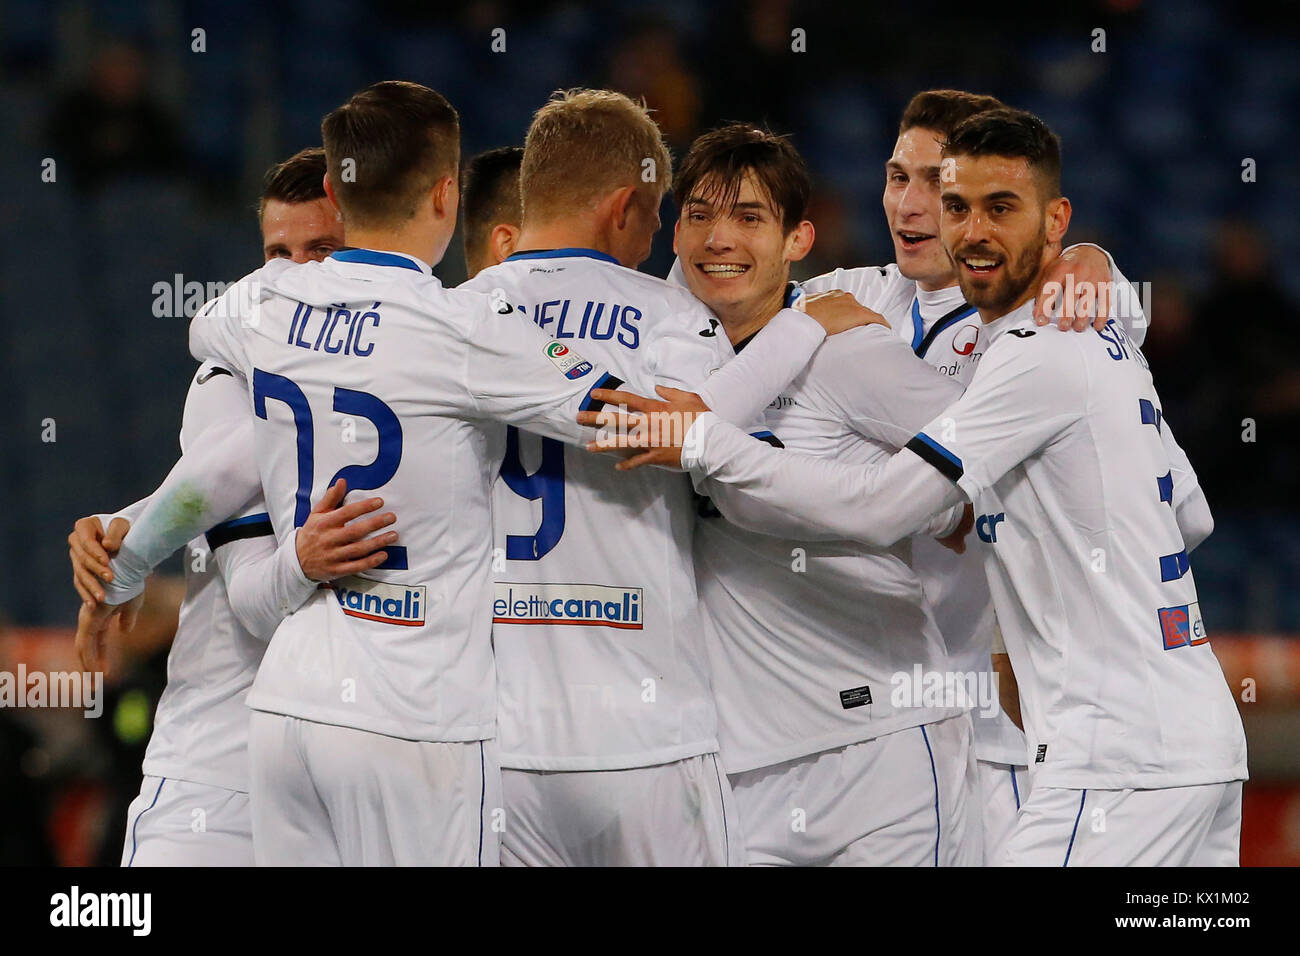 Olympic Stadium, ROME, Italy - 06/01/2018  Marten De Roon (C) of Atalanta celebrates with teammates after scoring against Roma during their Italian Serie A soccer match.   Credit: Giampiero Sposito/Alamy Live News Stock Photo